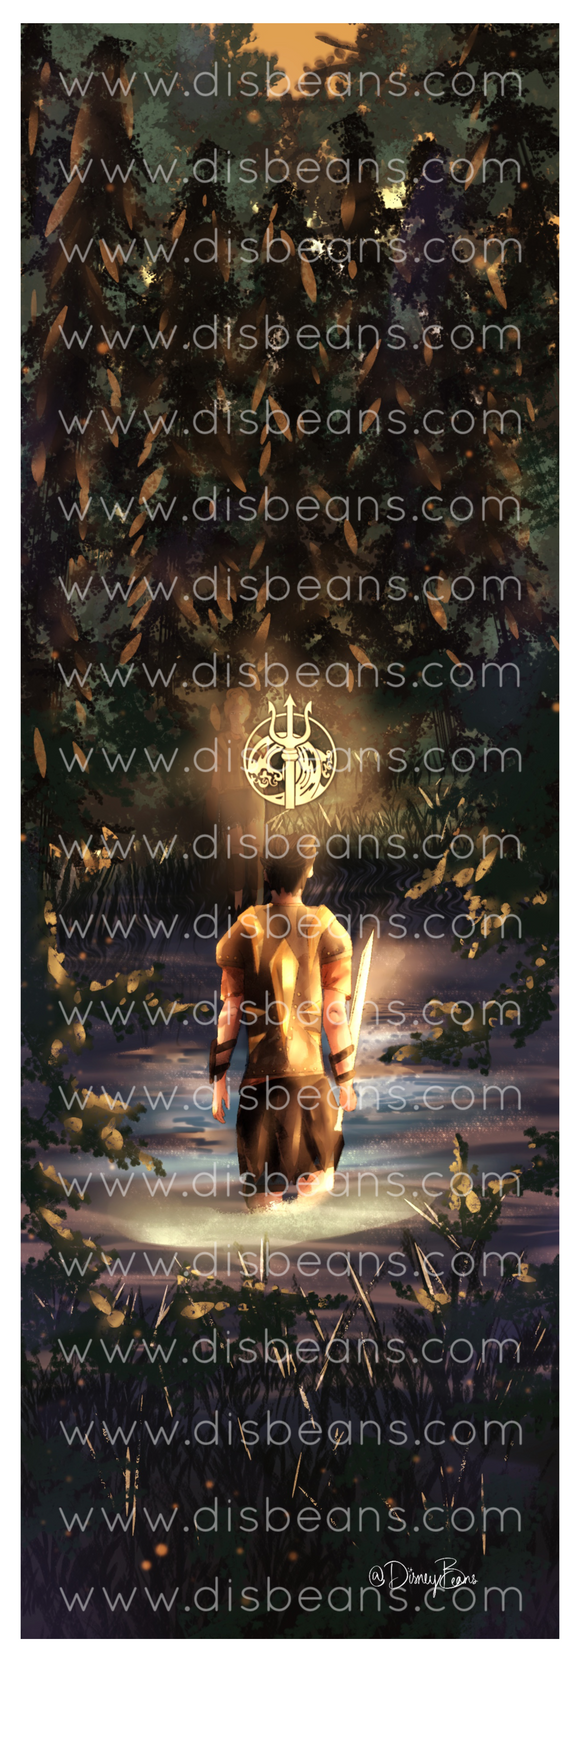 Son of Poseidon in the North Woods - Bookmark 2 W X 6 H inches BOOKMARK or Glossy Sticker Percy Jackson PJO and the Olympians